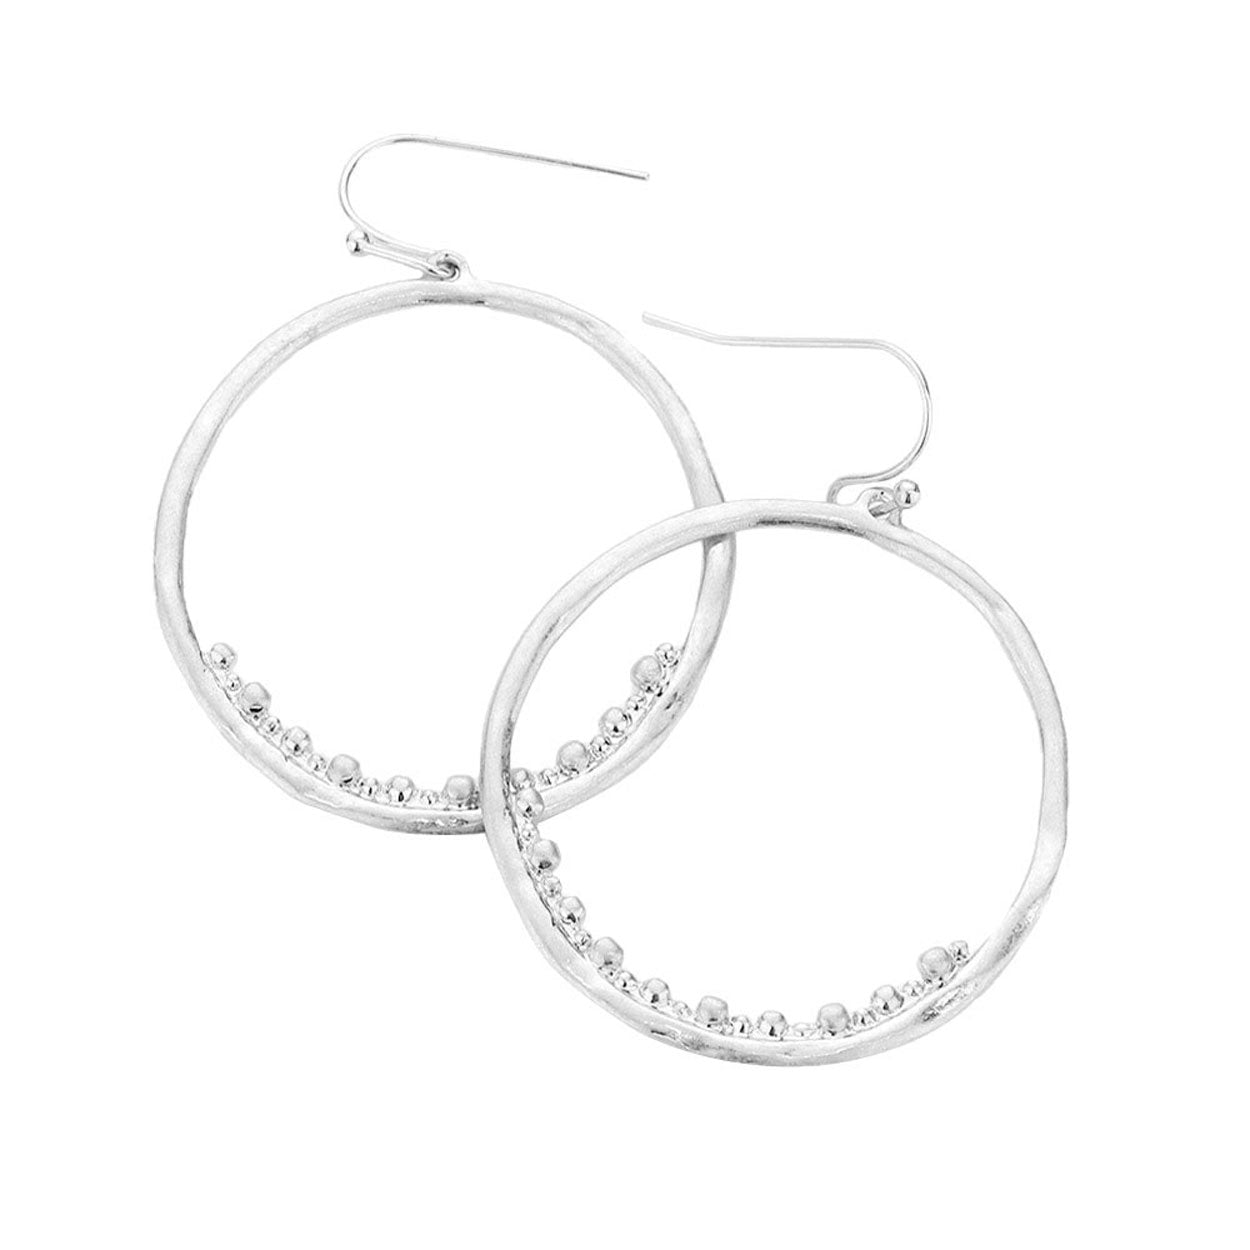 Worn Silver Bubble Detailed Irregular Metal Open Circle Dangle Earrings, put on a pop of color to complete your ensemble. Beautifully crafted design adds a gorgeous glow to any outfit Perfect for adding just the right amount of shimmer & shine . Perfect Birthday Gift, Anniversary Gift, Mother's Day Gift, Graduation Gift.